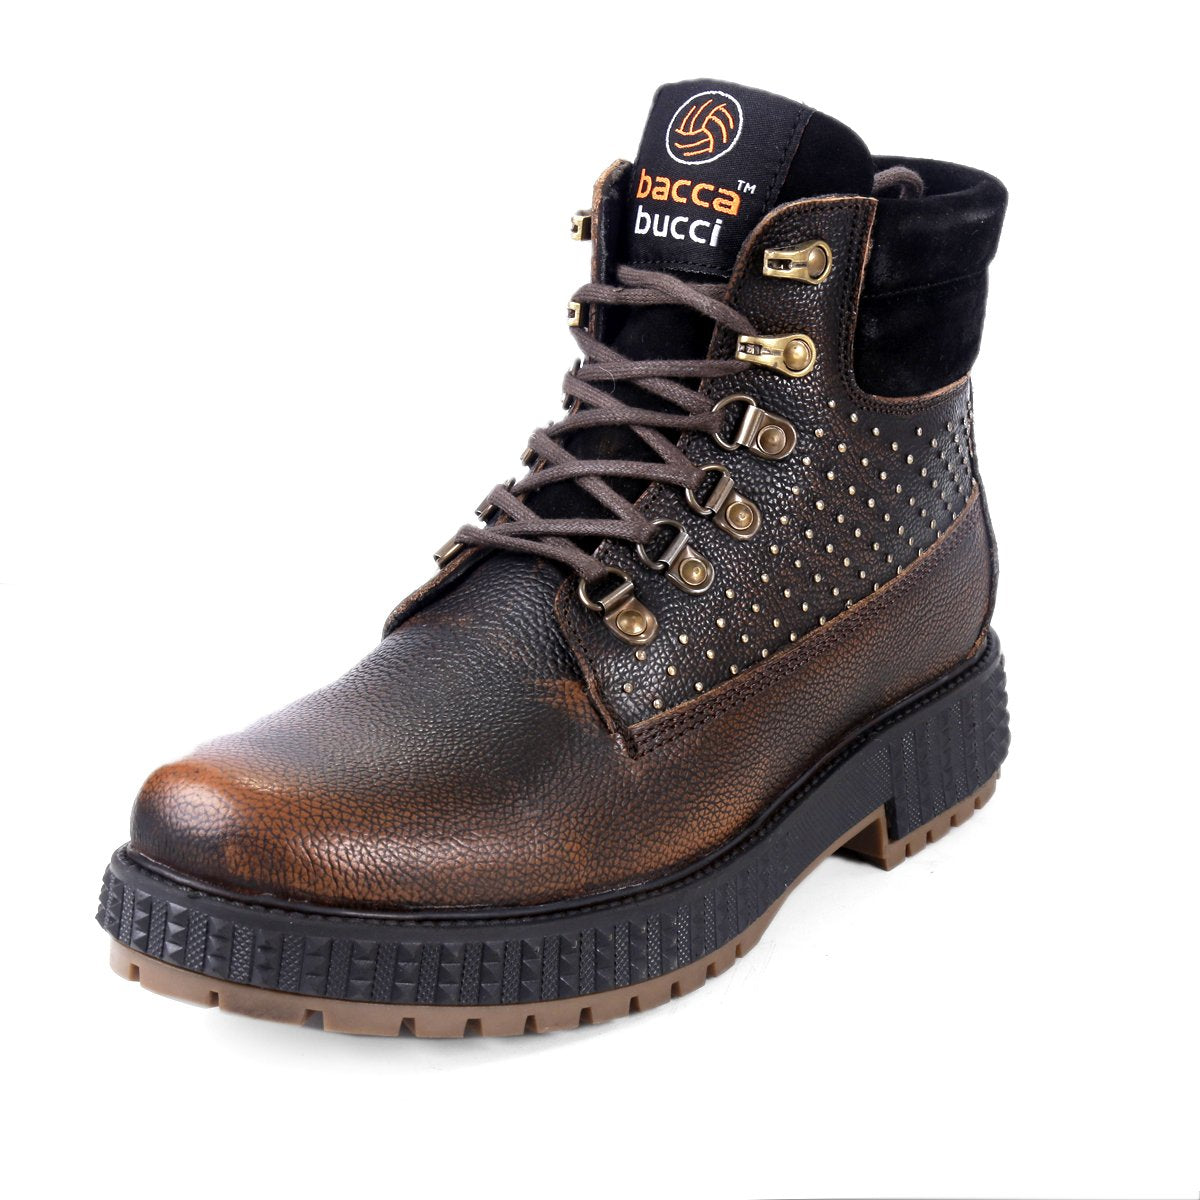 water resistant boots, leather boots for men, full grain leather boots, metal boots for men